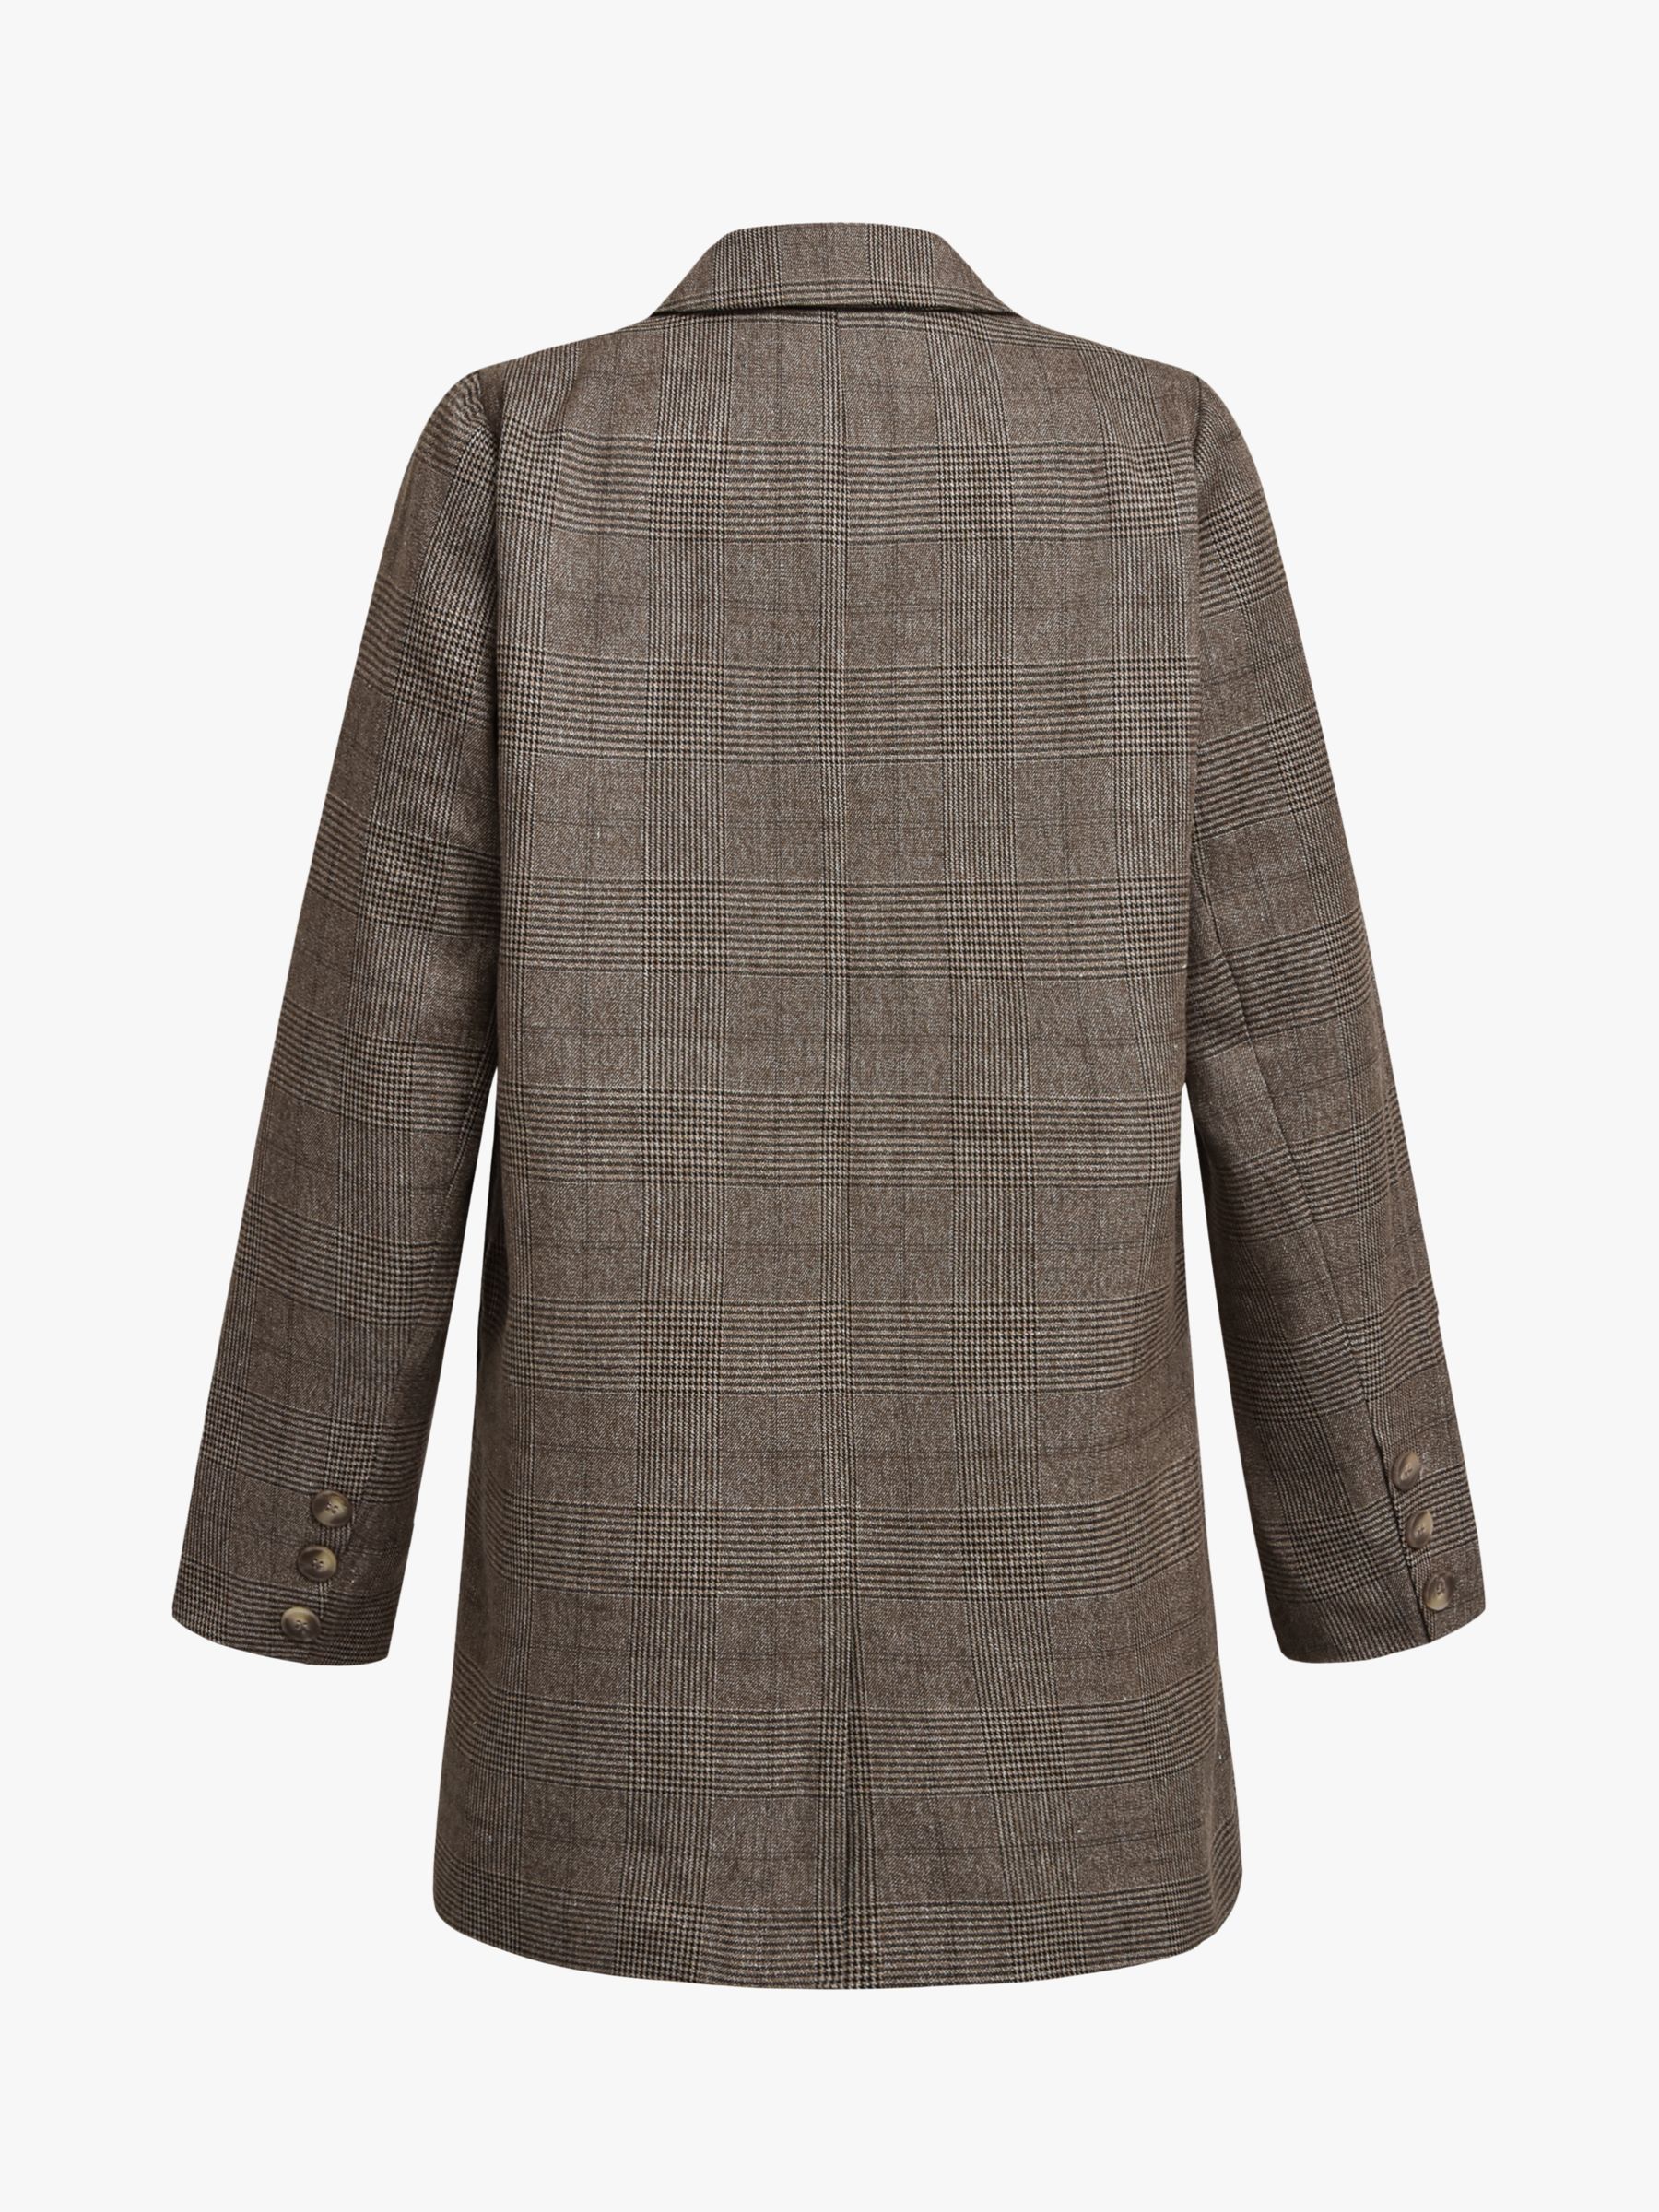 Buy A-VIEW Annali Oversized Check Blazer, Brown Online at johnlewis.com